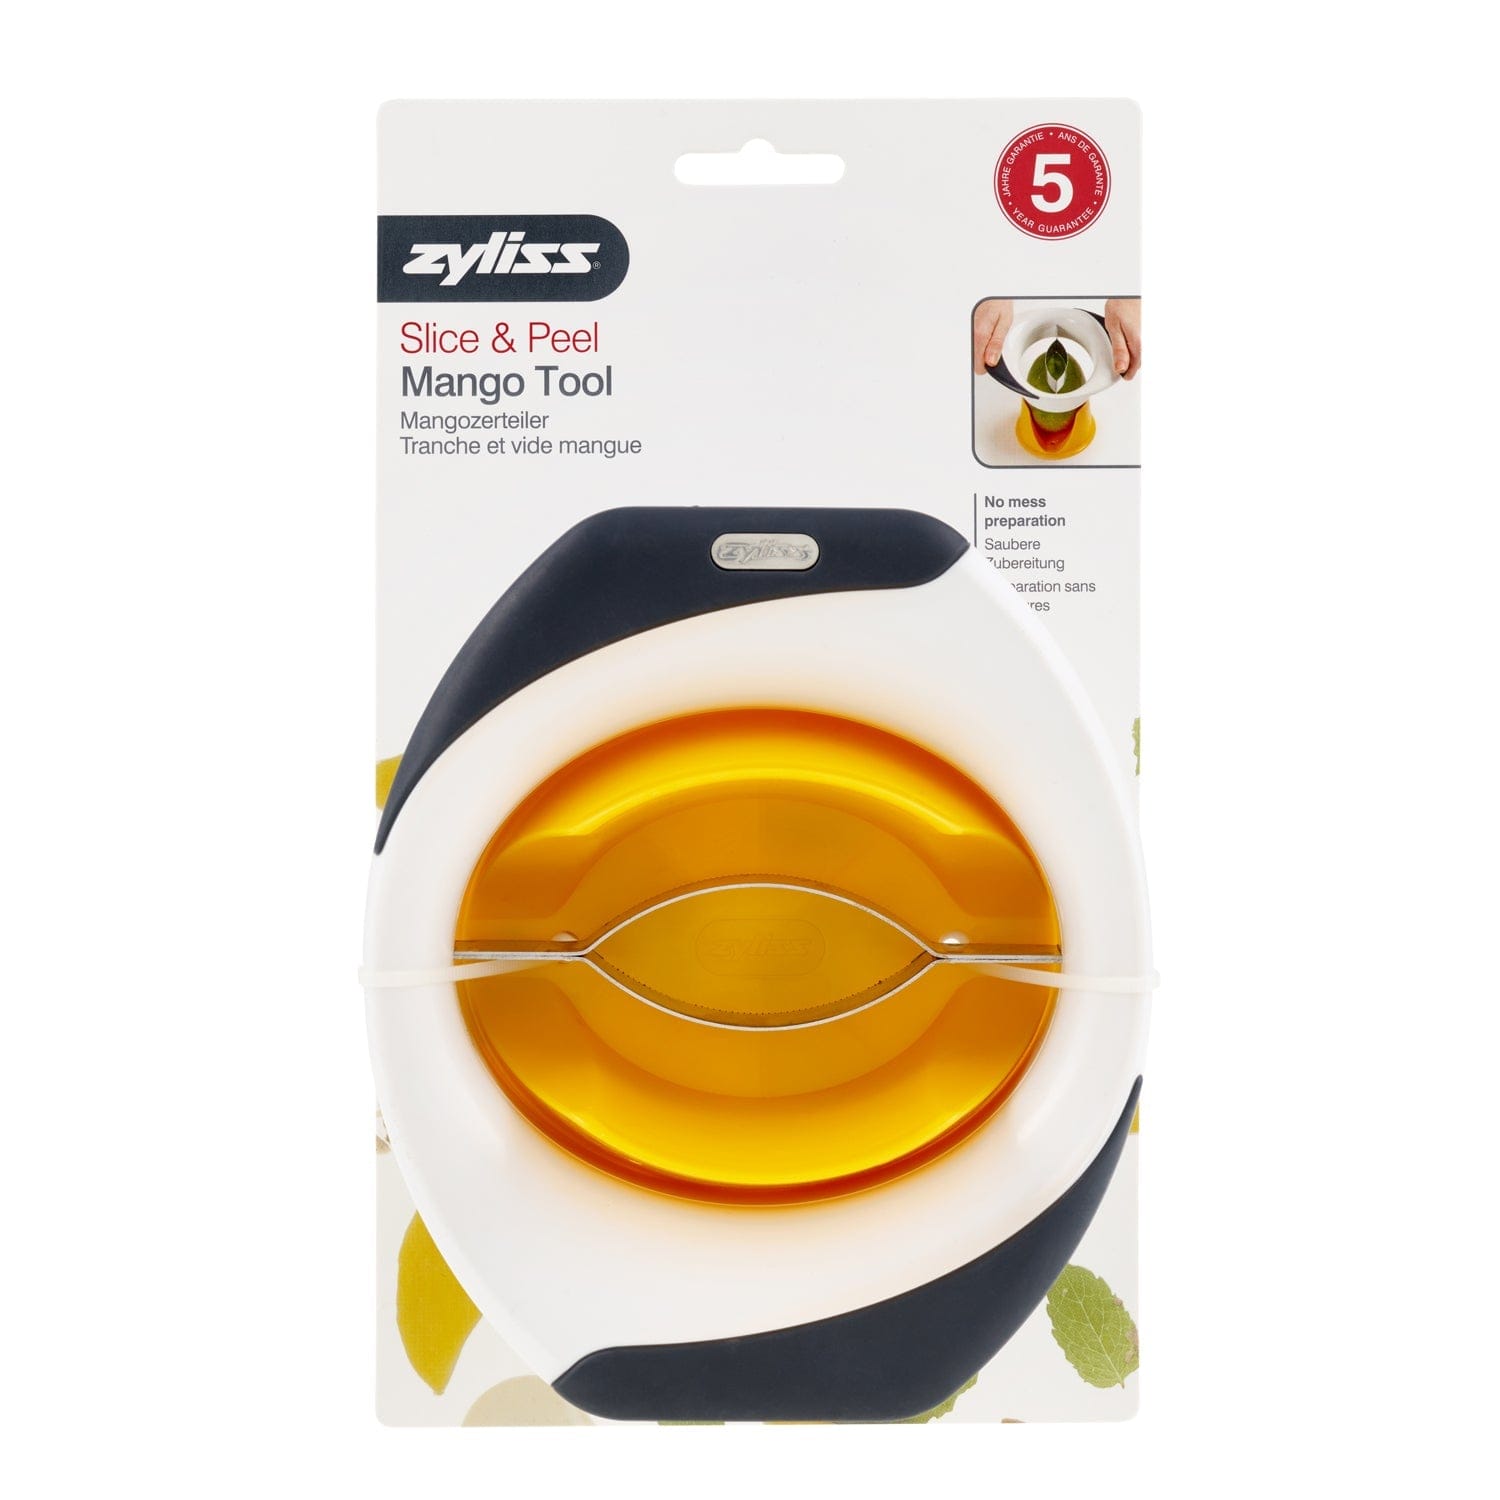 Zyliss Slice & Peel 3-in-1 Mango Slicer, Peeler and Pit Remover Tool